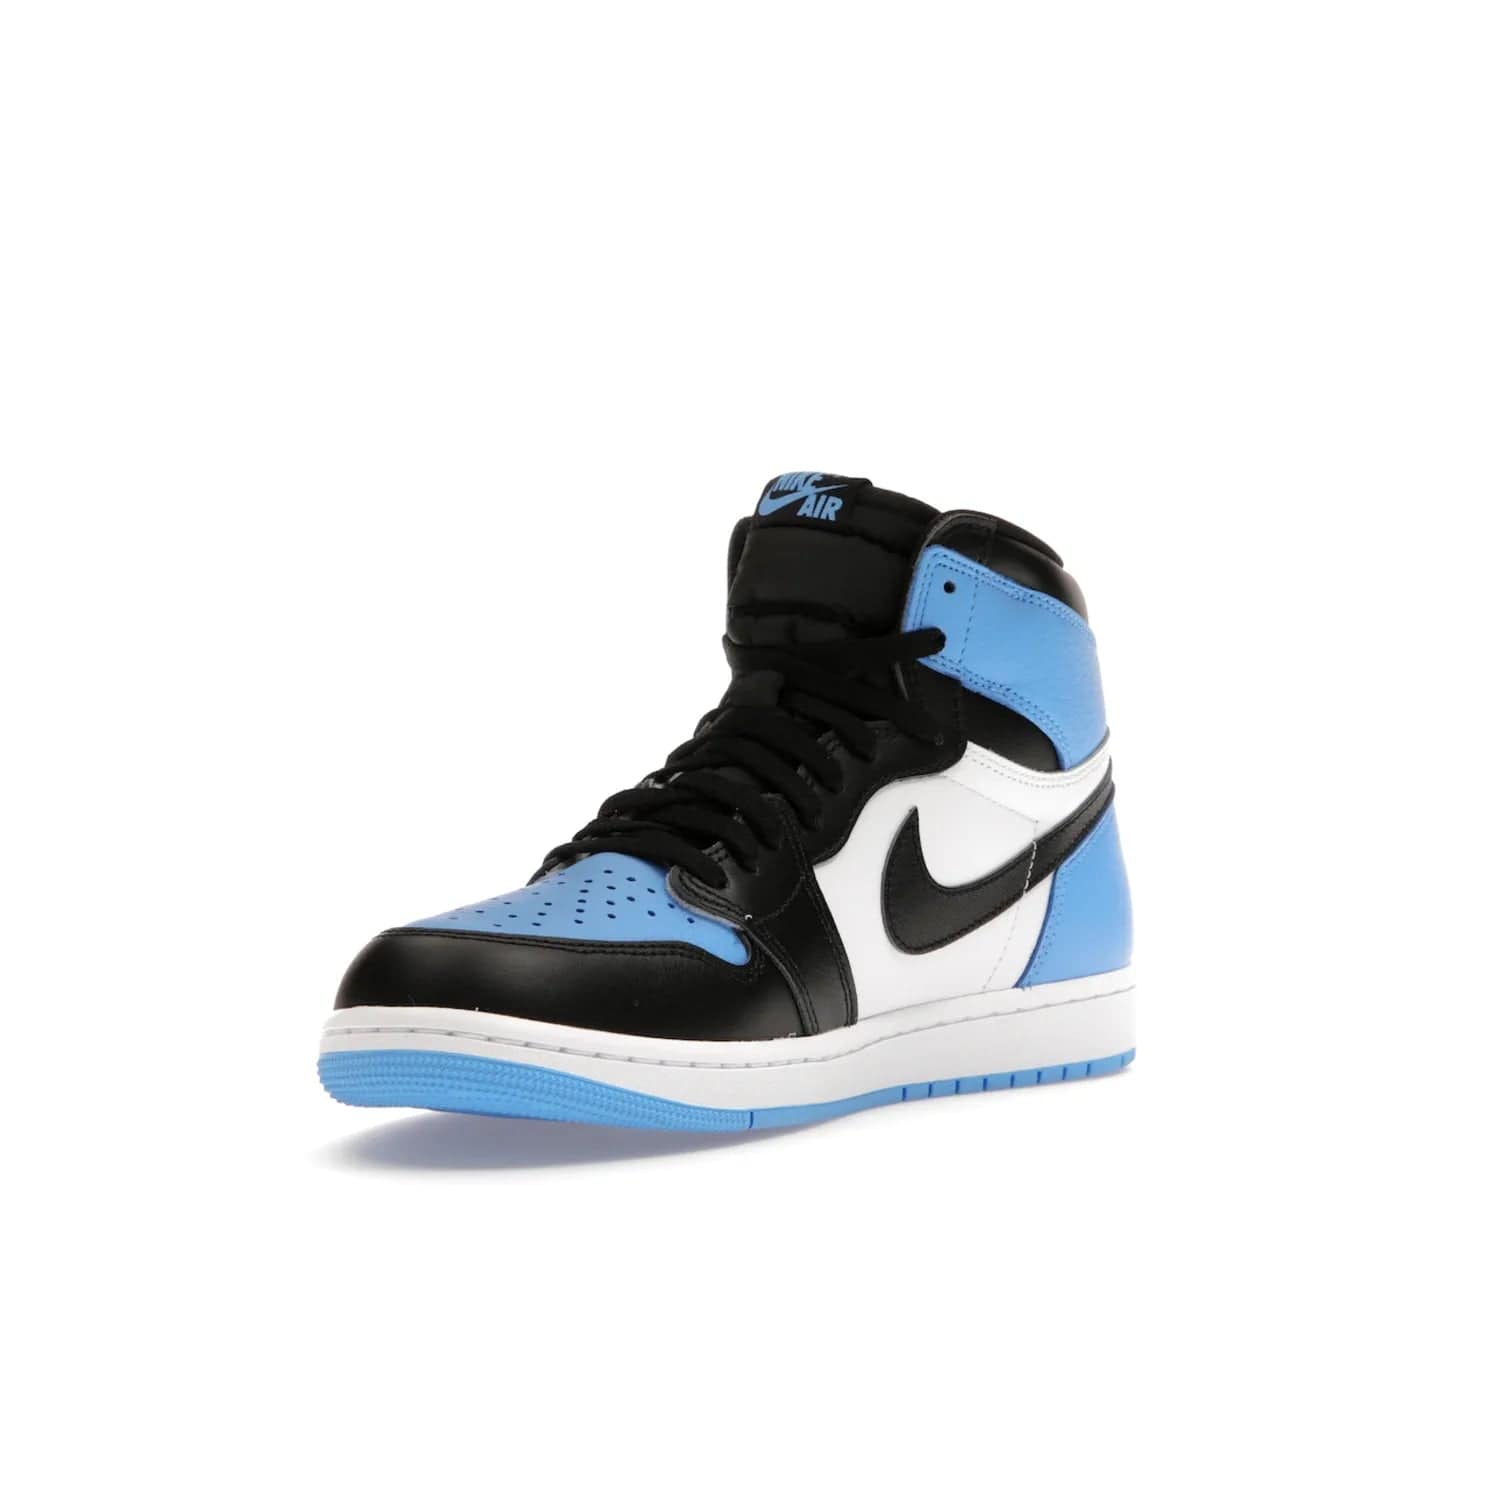 Jordan 1 Retro High OG UNC Toe - Image 14 - Only at www.BallersClubKickz.com - Jordan 1 High OG UNC Toe is a fashionable, high-quality sneaker featuring University Blue, Black White and White. Releasing July 22, 2023, it's the perfect pick up for sneakerheads.